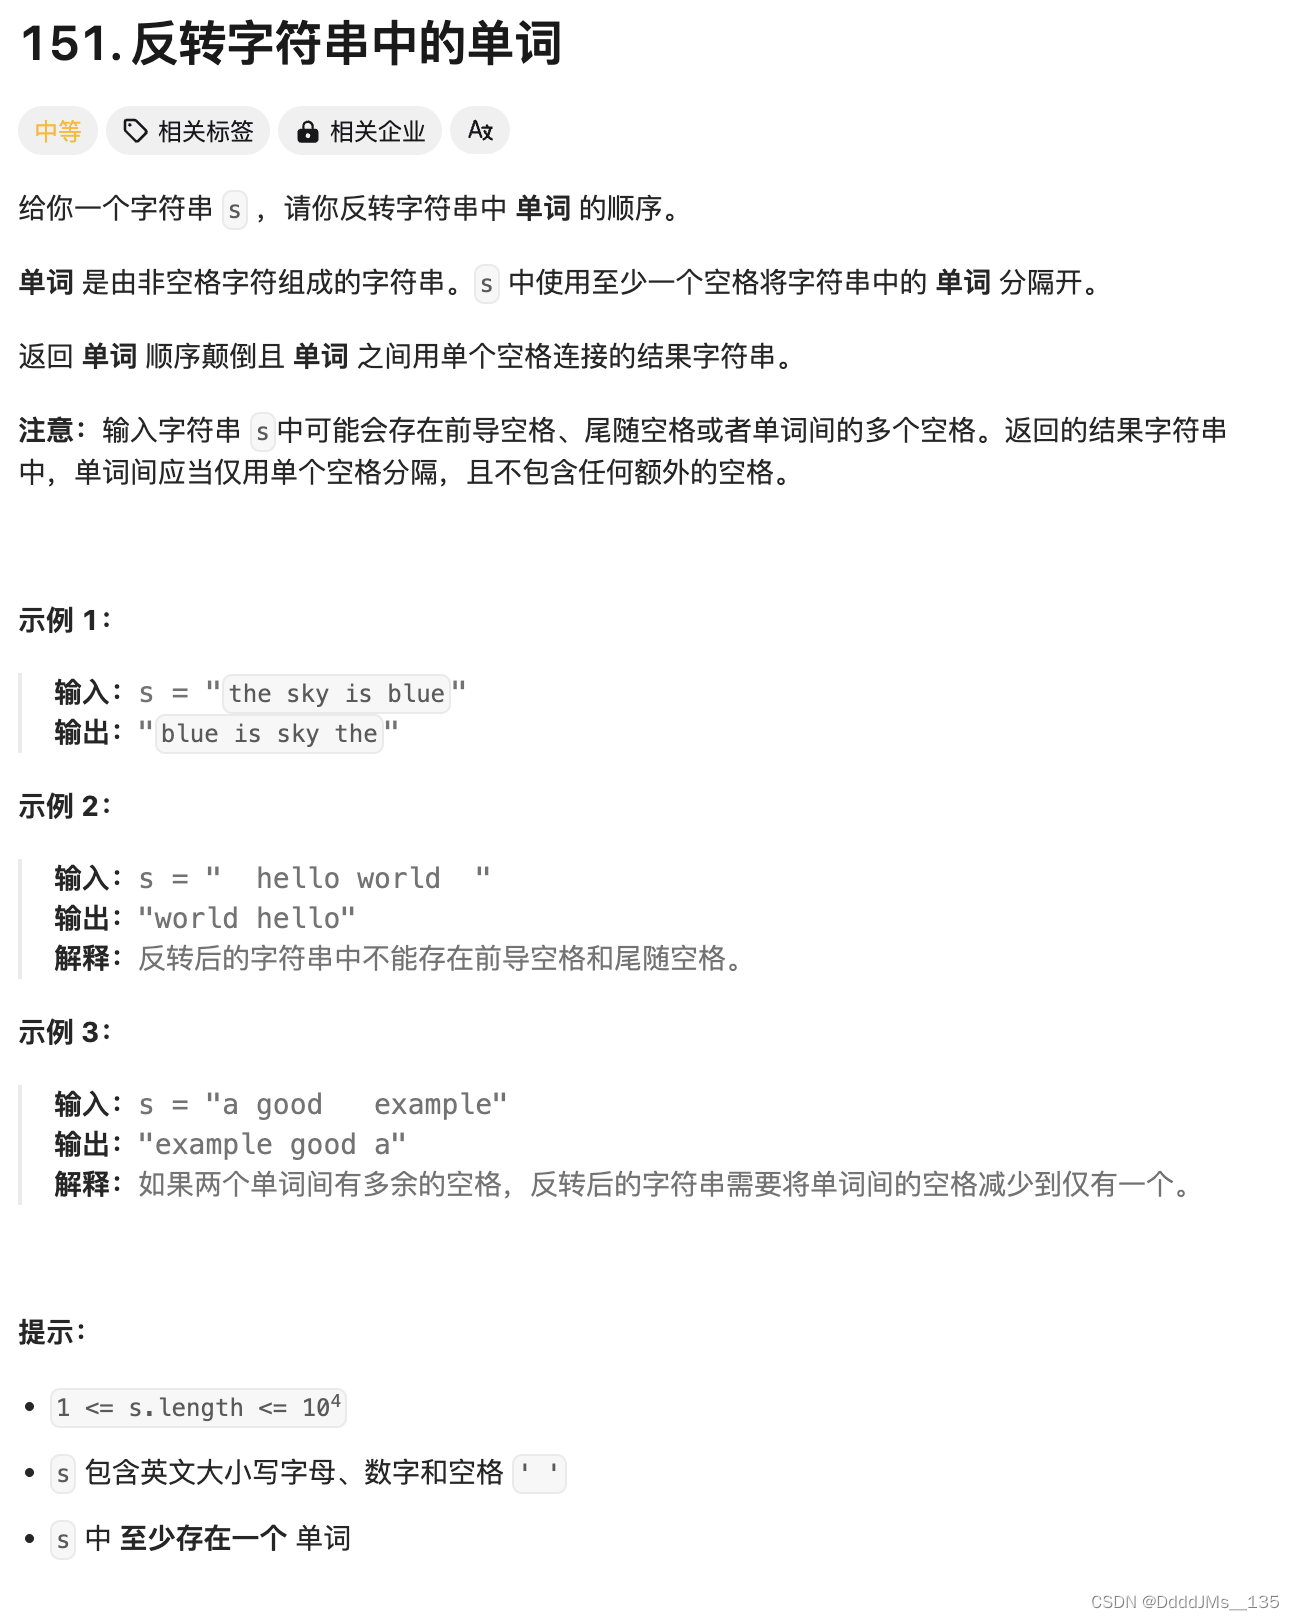 C语言 | <span style='color:red;'>Leetcode</span> C语言题解之第151<span style='color:red;'>题</span><span style='color:red;'>反</span><span style='color:red;'>转</span><span style='color:red;'>字符串</span><span style='color:red;'>中</span><span style='color:red;'>的</span><span style='color:red;'>单词</span>